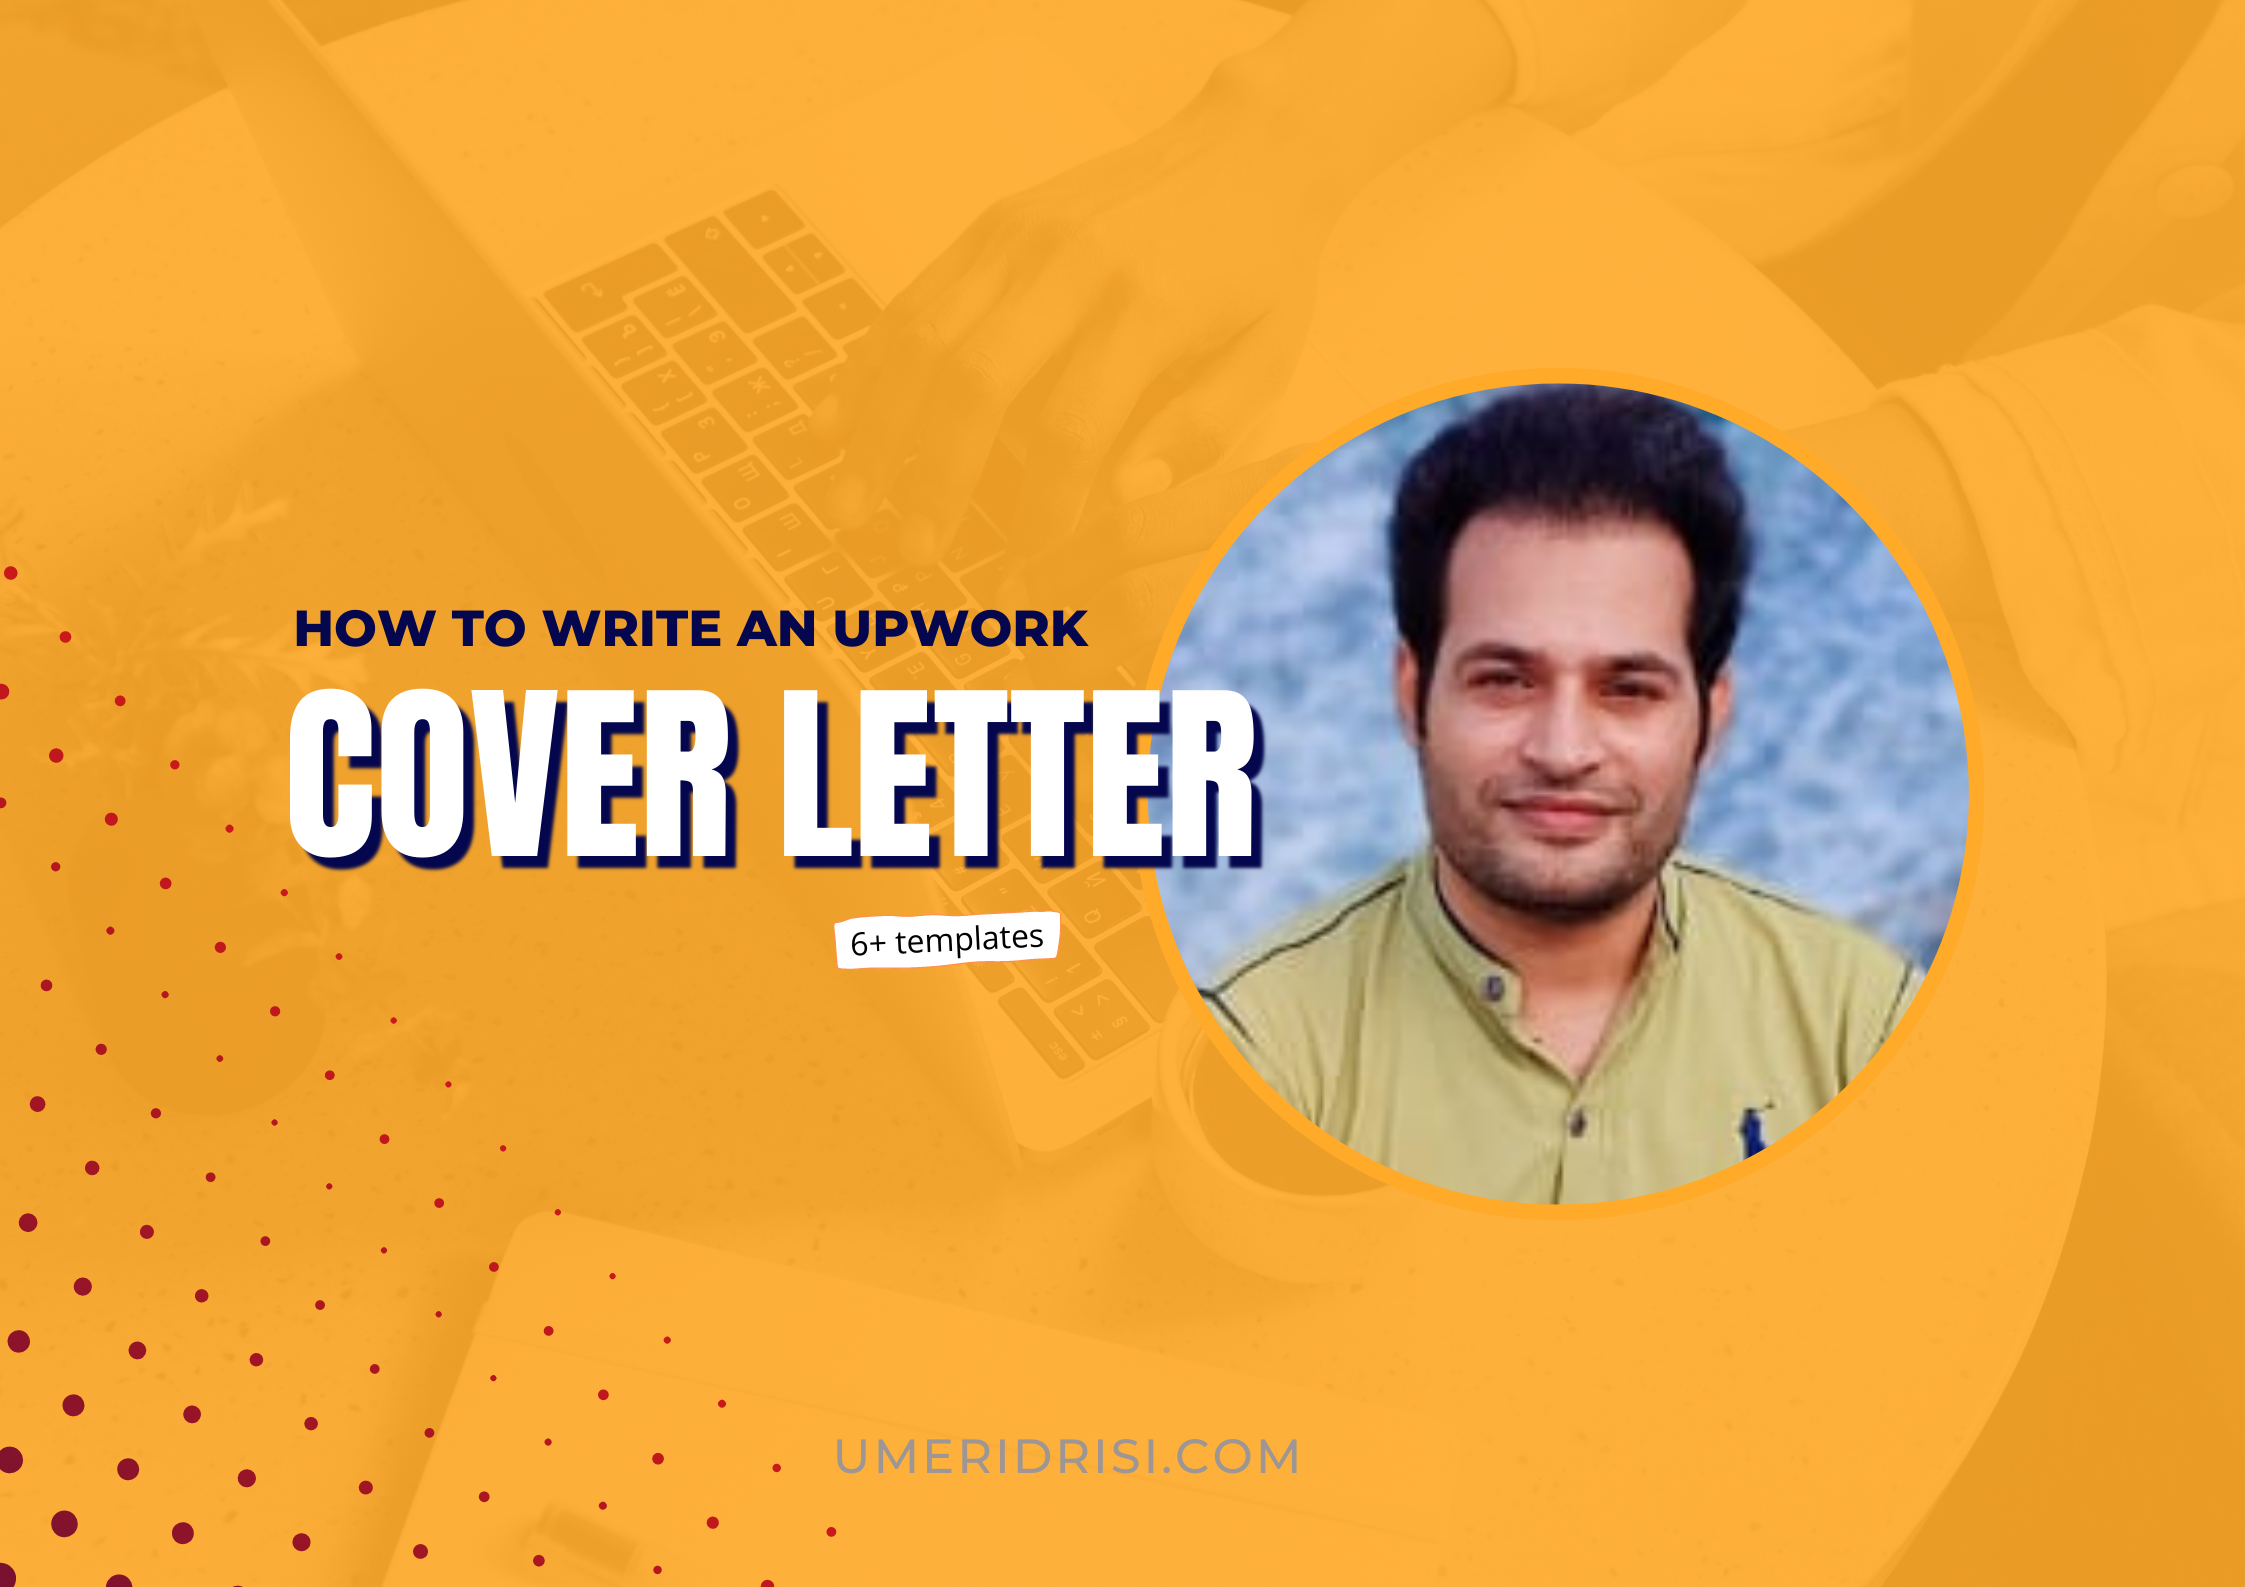 How To Write An Upwork Cover Letter? (Free Templates)